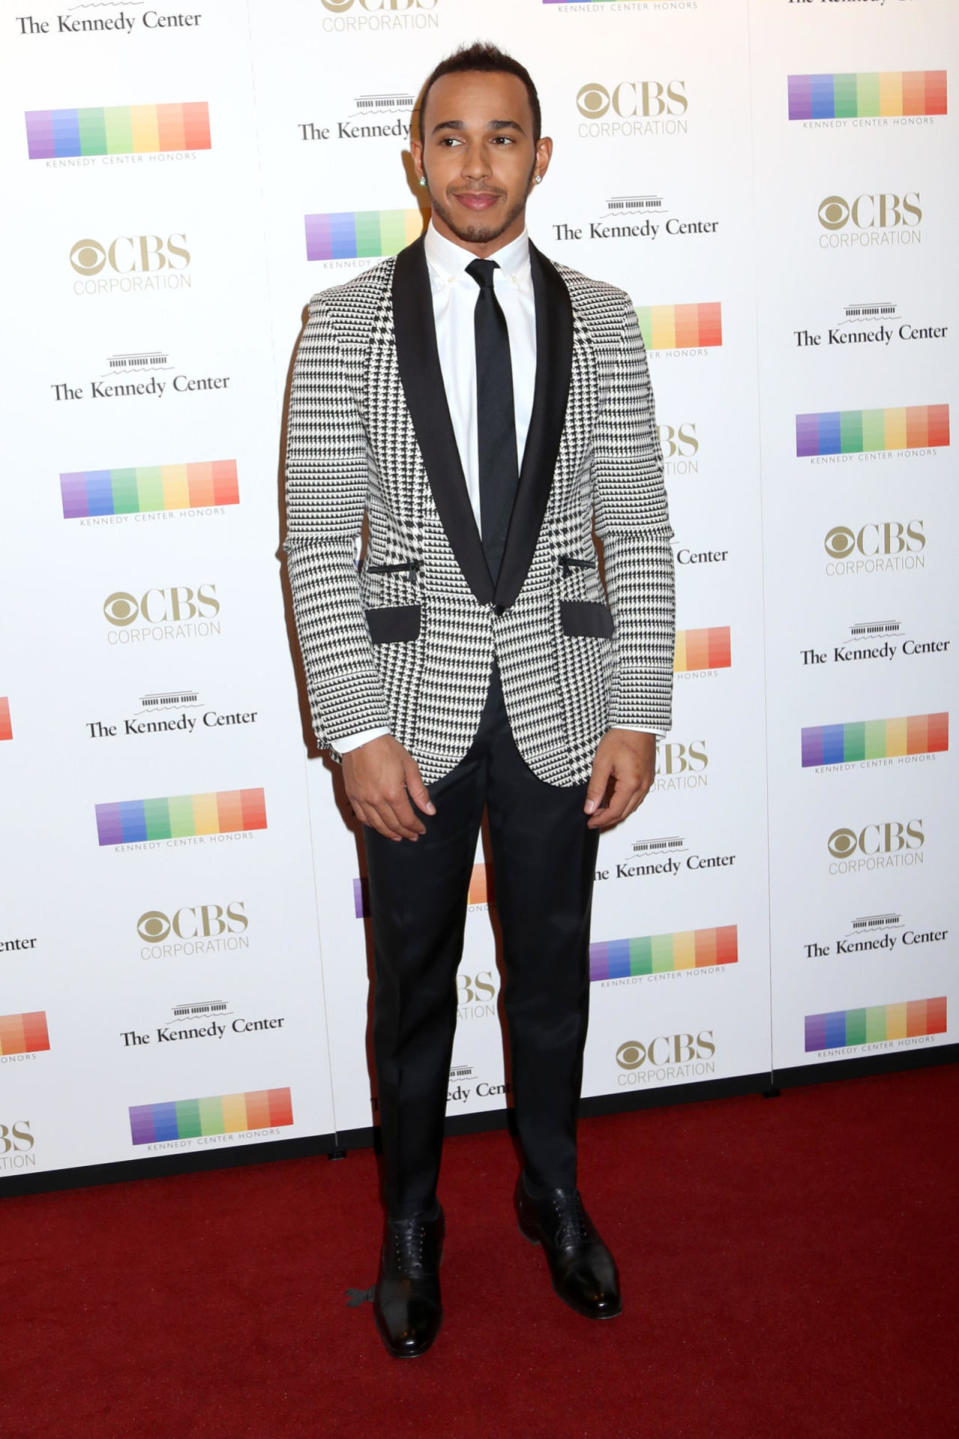 Lewis Hamilton in a houndstooth jacket at the 38th Annual Kennedy Center Honors at The Kennedy Center Hall of States in Washington, DC.